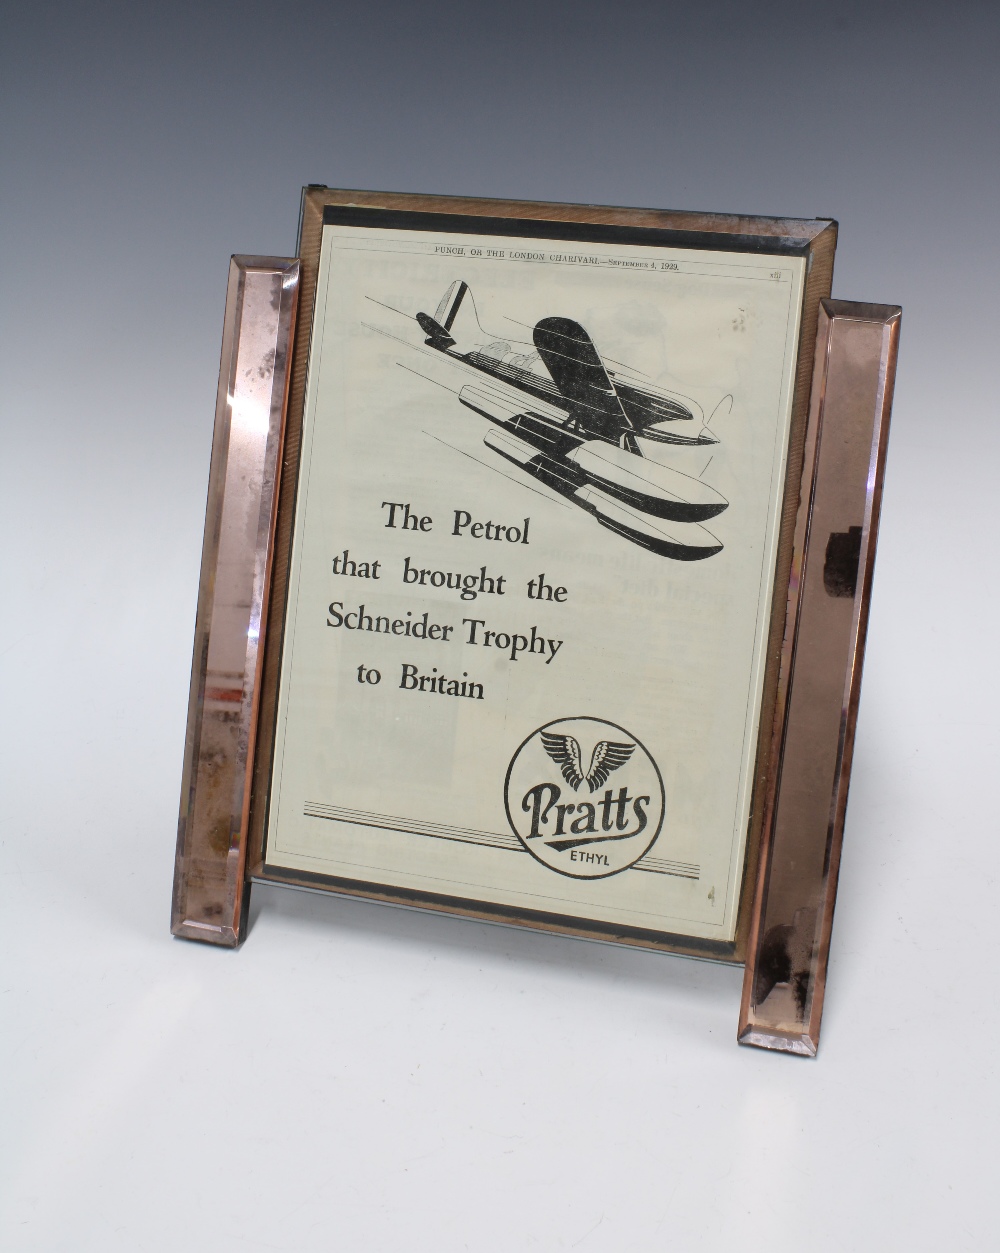 'Pratts - the petrol that brought the Schneider Trophy to Britain' in an Art Deco glass frame, 29